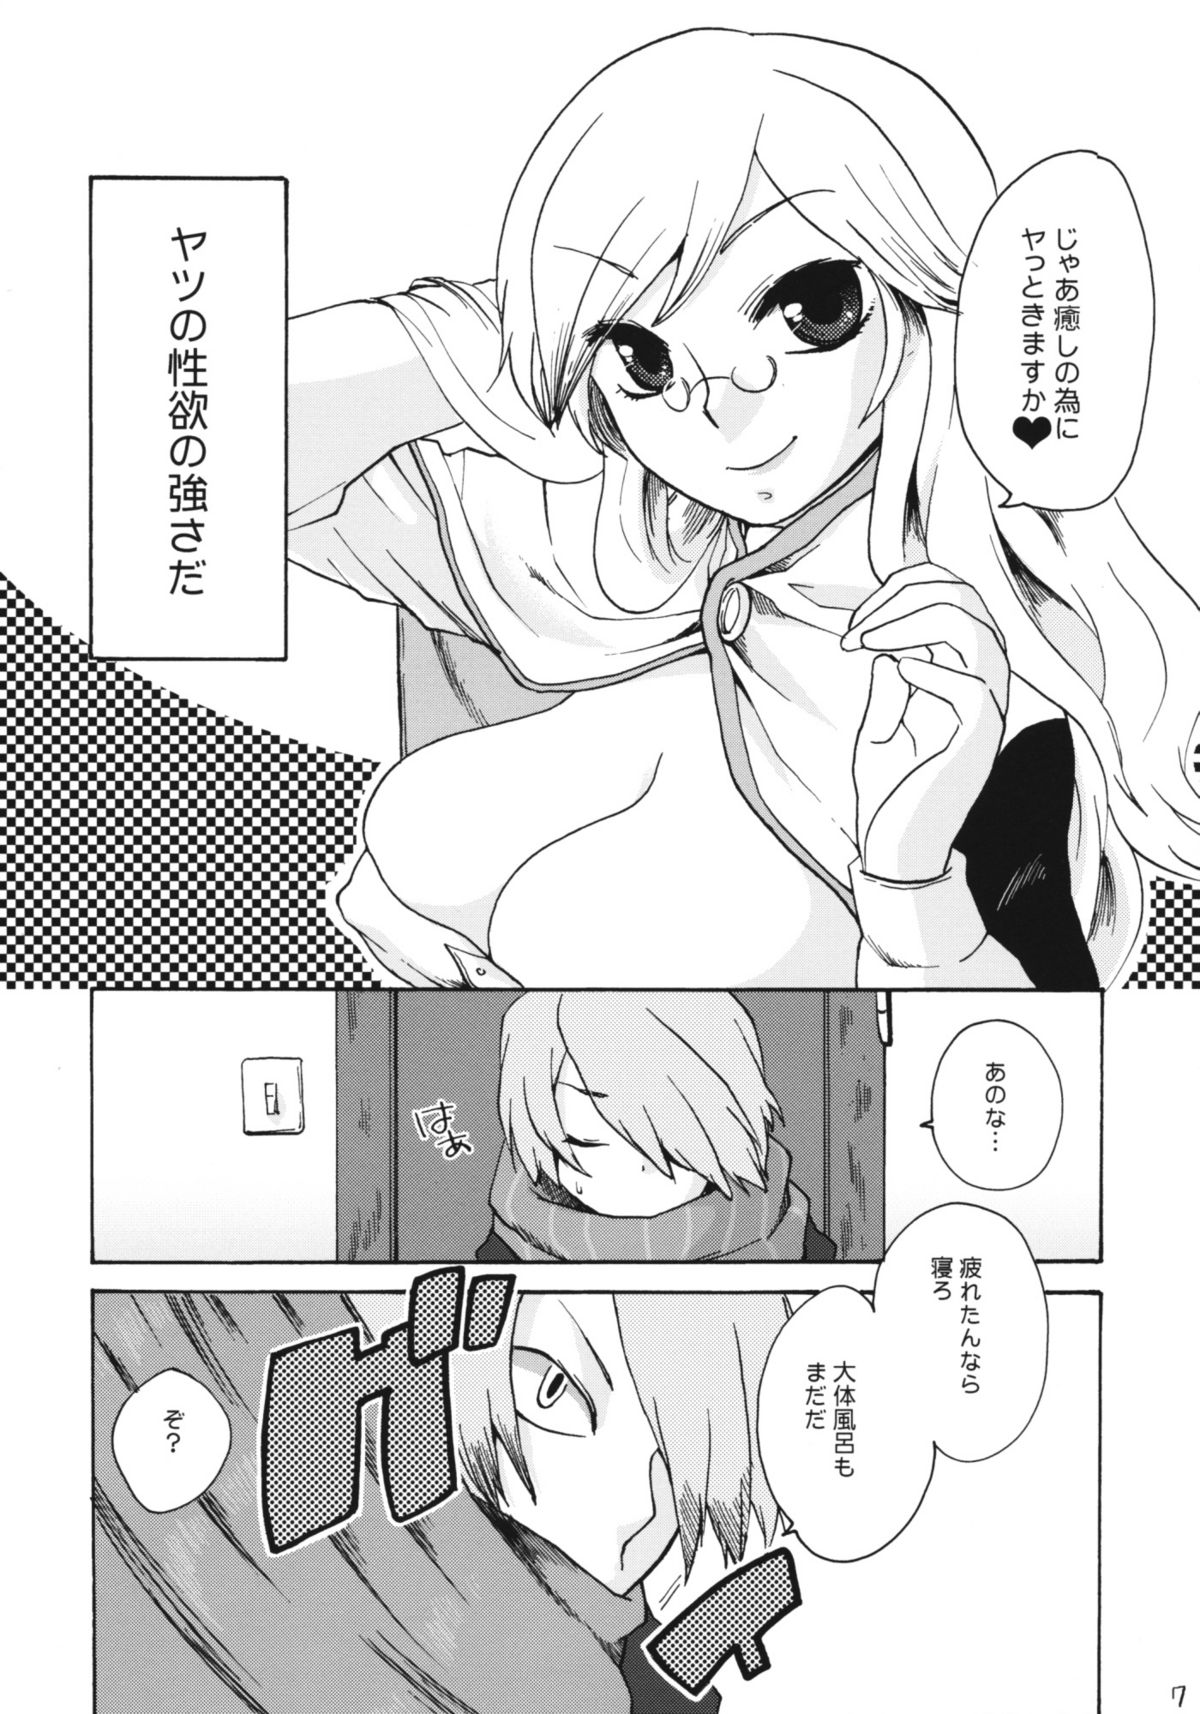 (ComiComi13) [Trip Spider (niwacho)] In You And Me (7th DRAGON) page 6 full